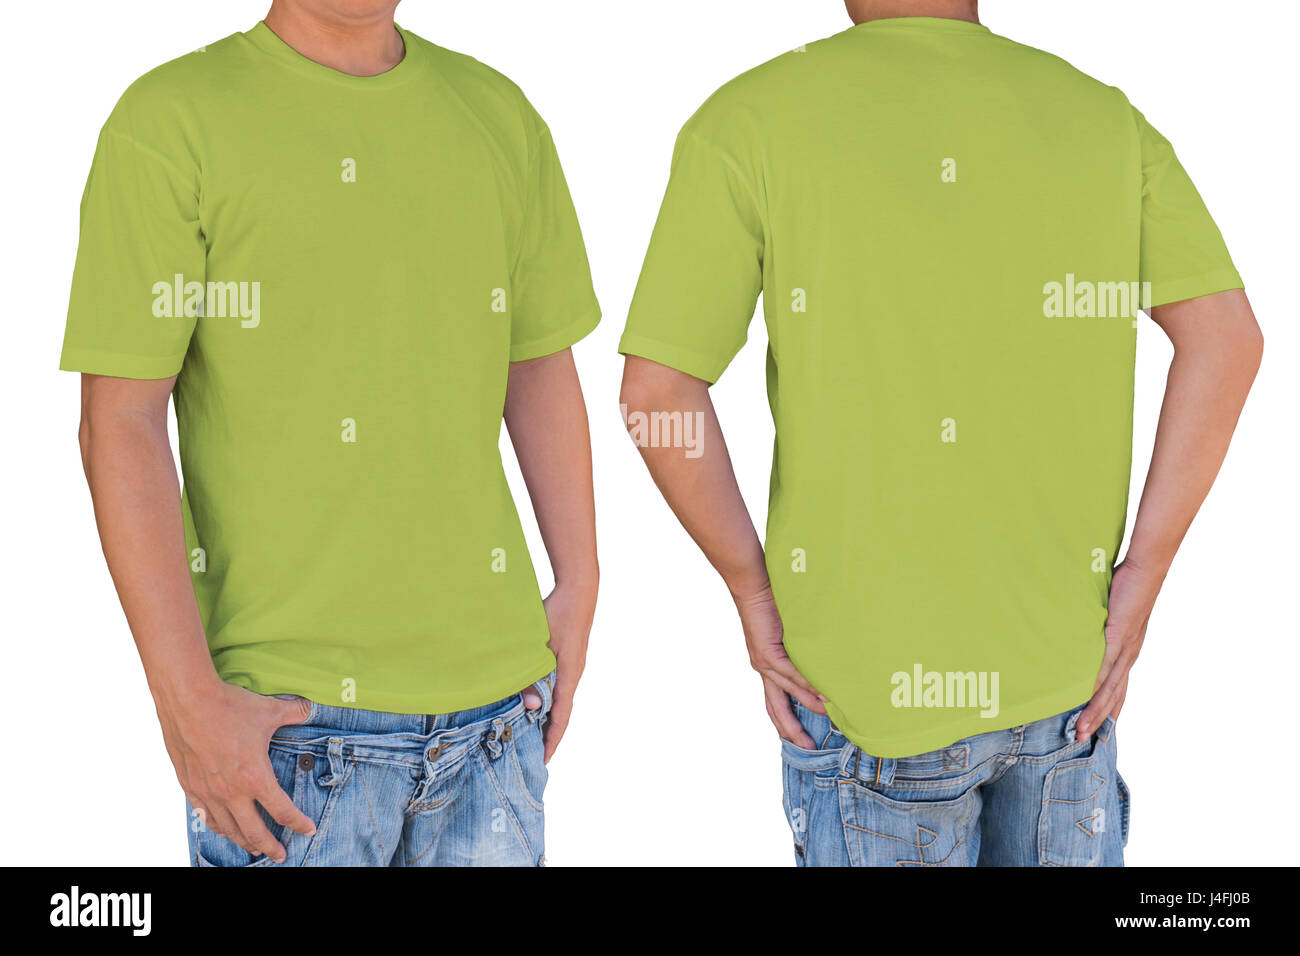 Man wearing blank celery t-shirt with clipping path, front and back view. Template for insert logo, pattern, or artwork. Stock Photo